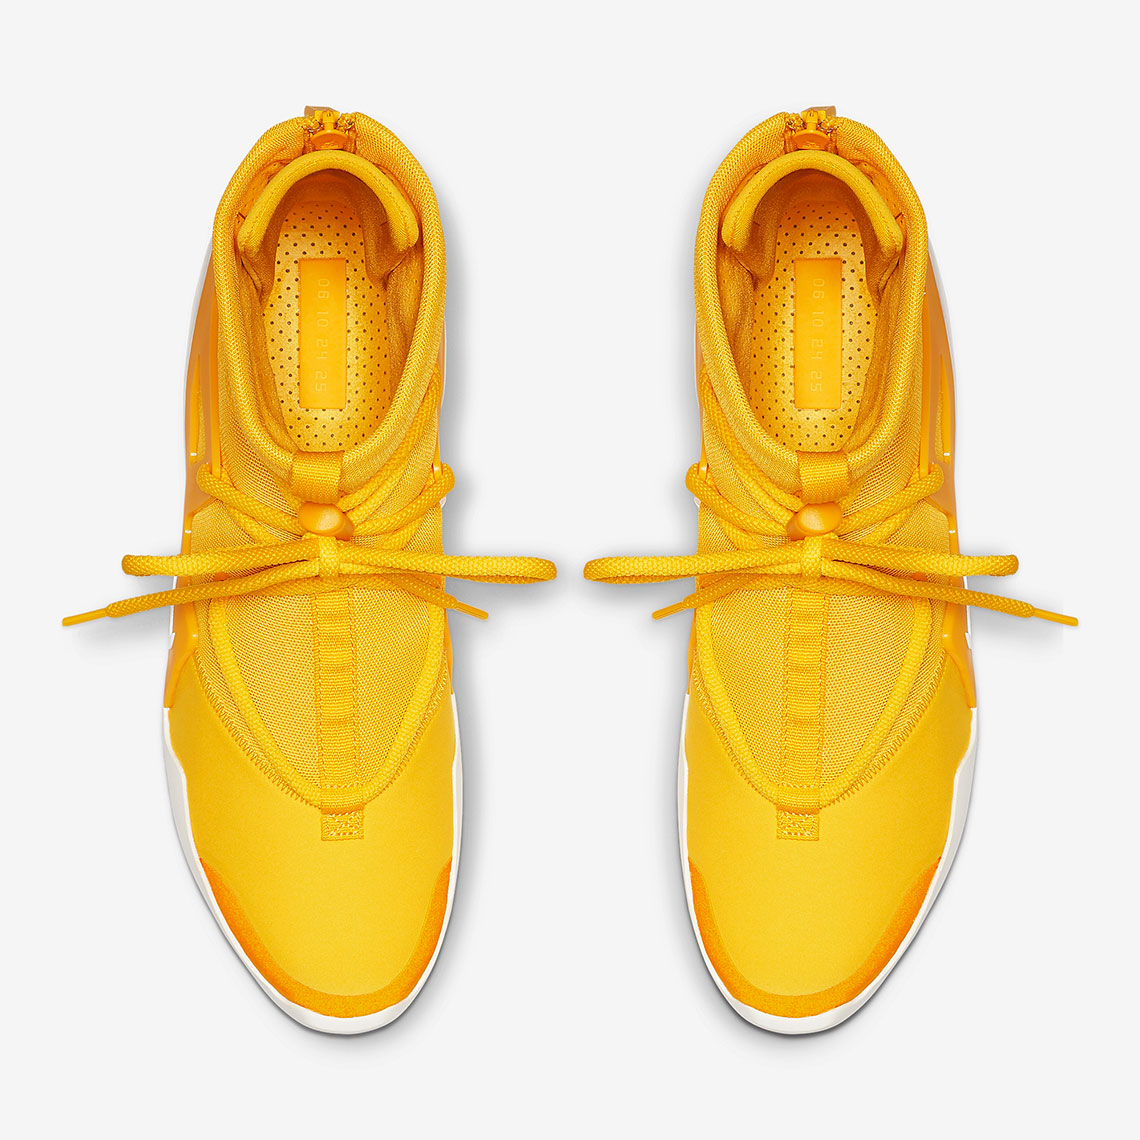 air fear of god 1 yellow price